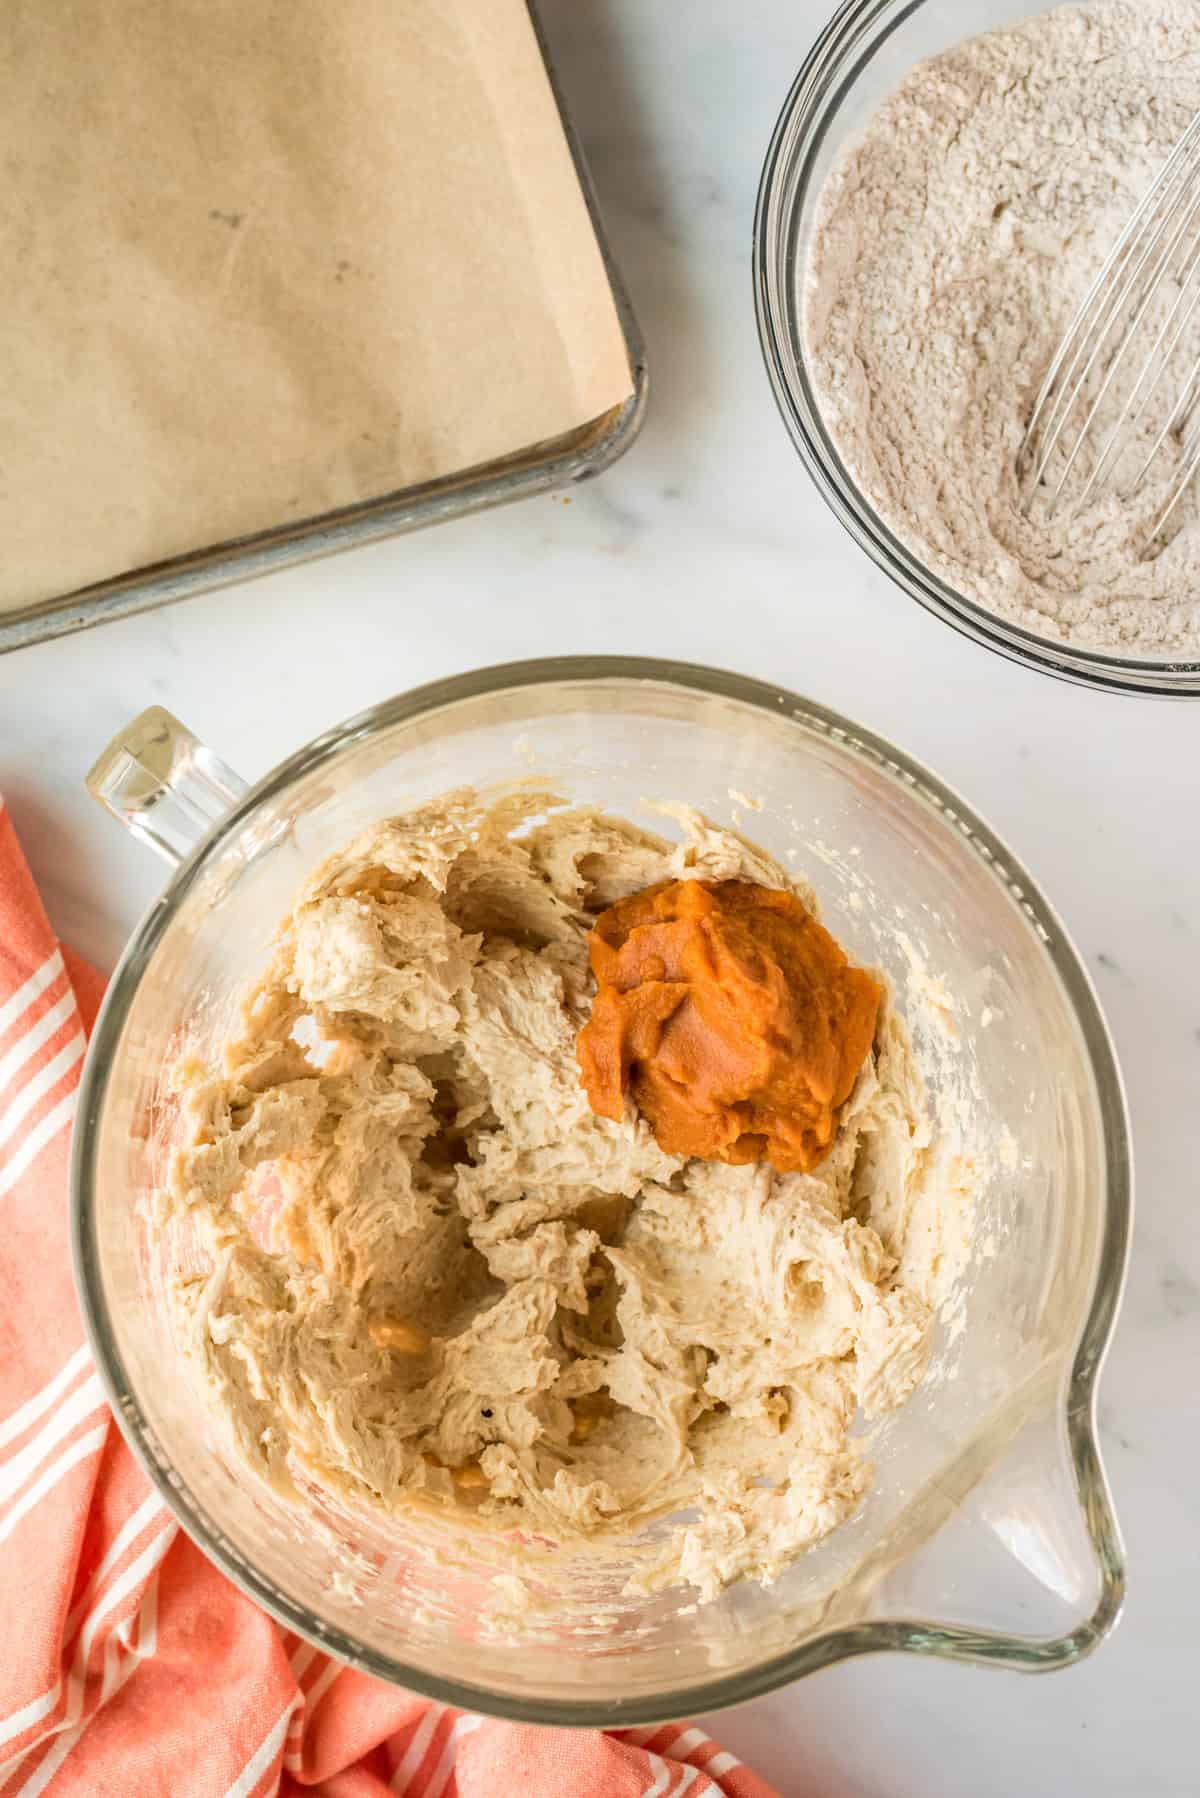 Cookie batter with pumpkin in a bowl